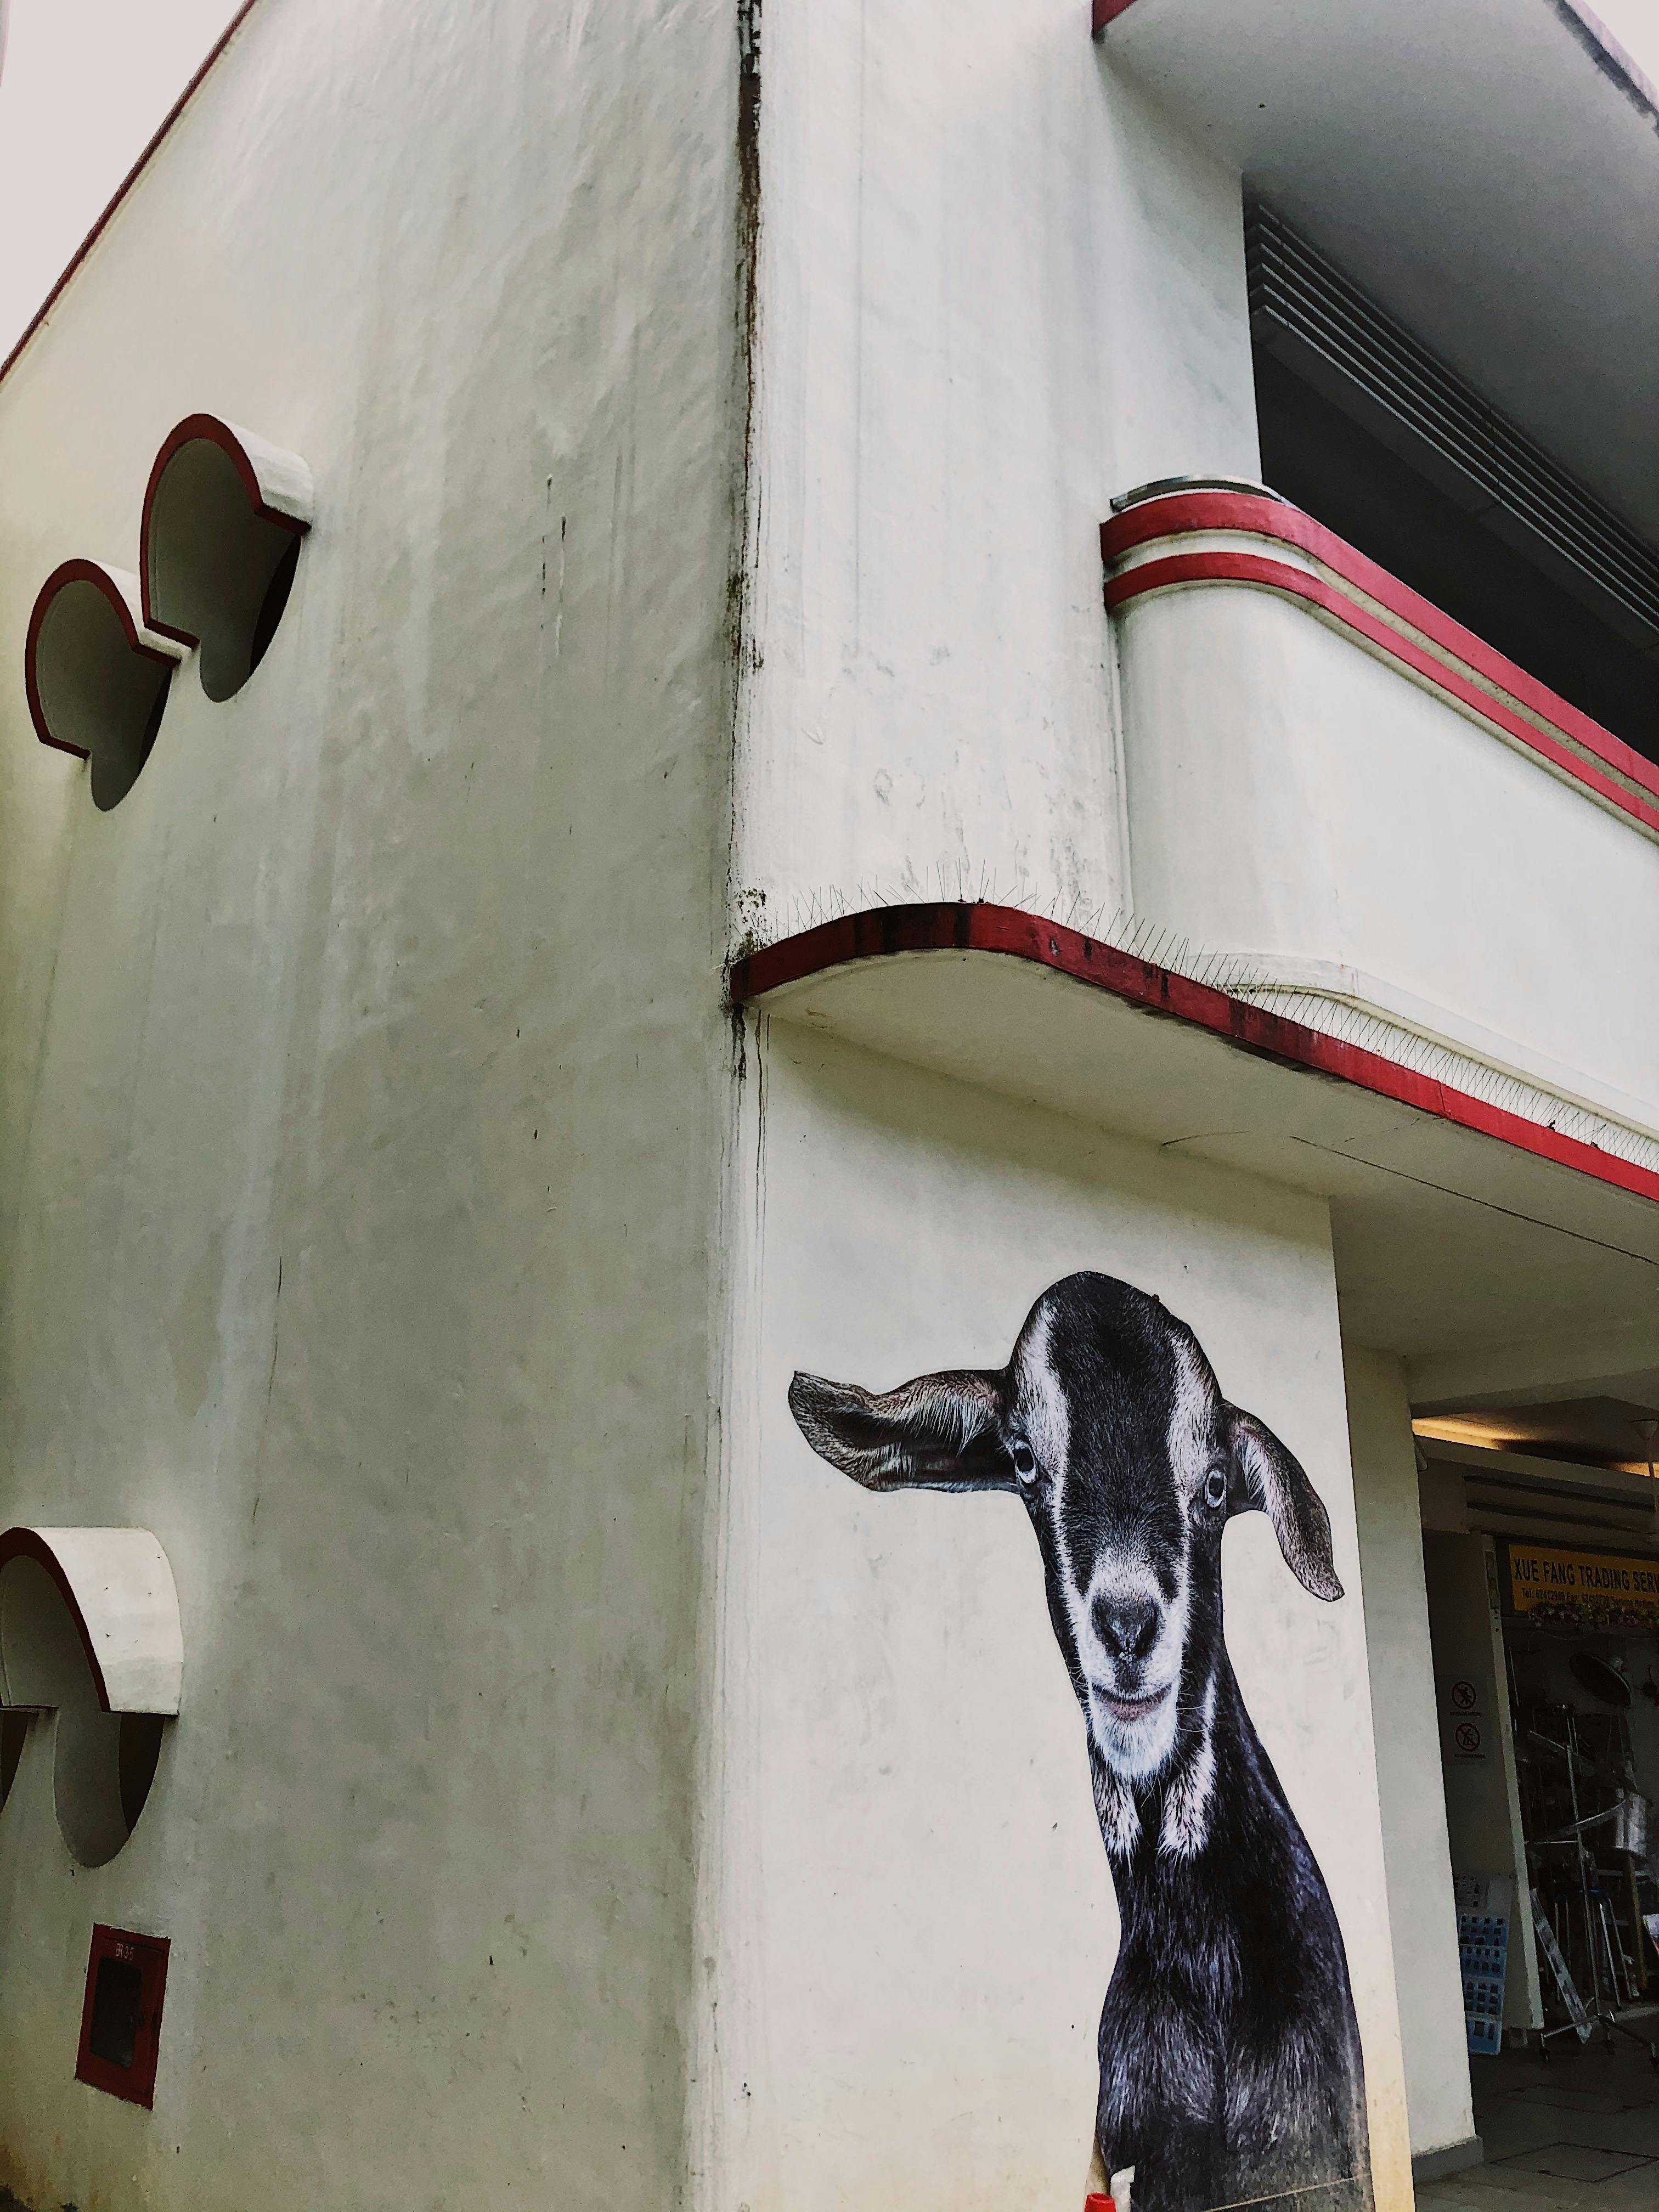 A murales on a Tiong Bahru building